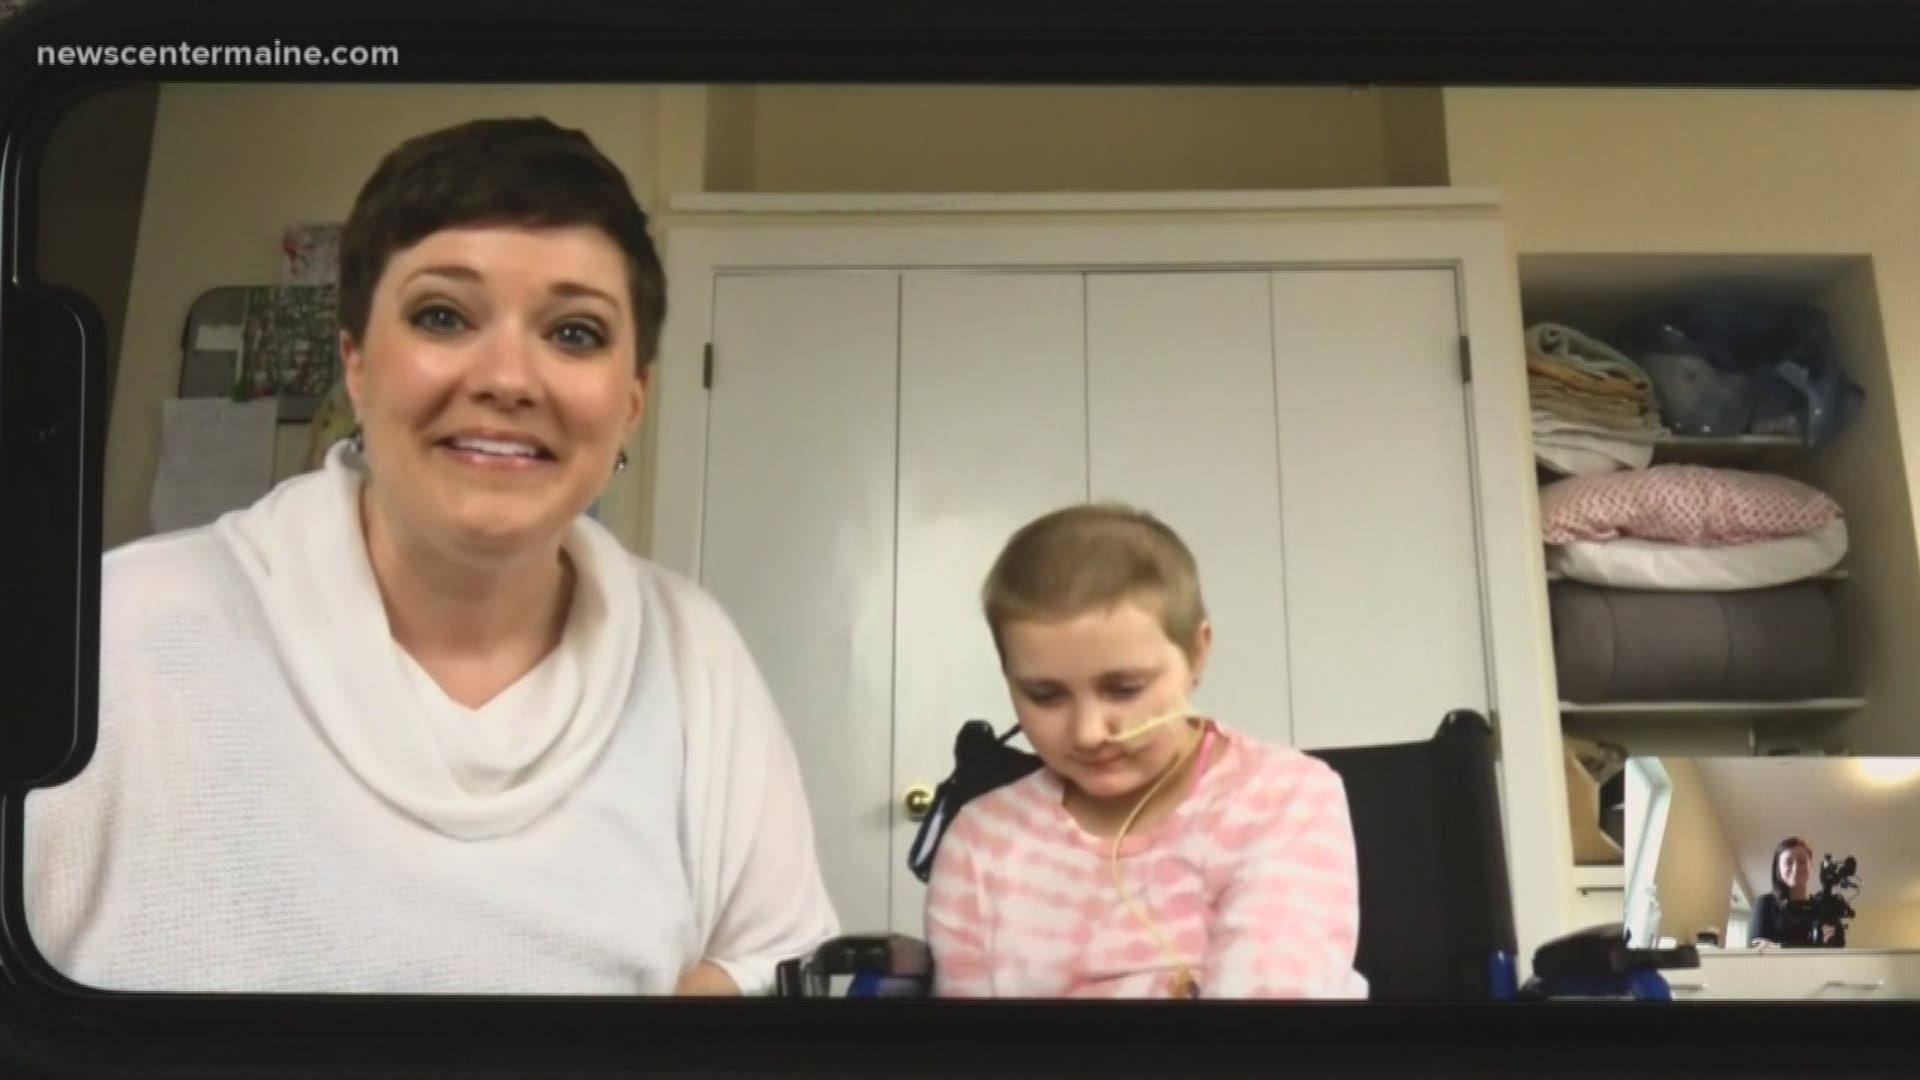 'Stay home!' Mom of teen battling cancer urges social distancing